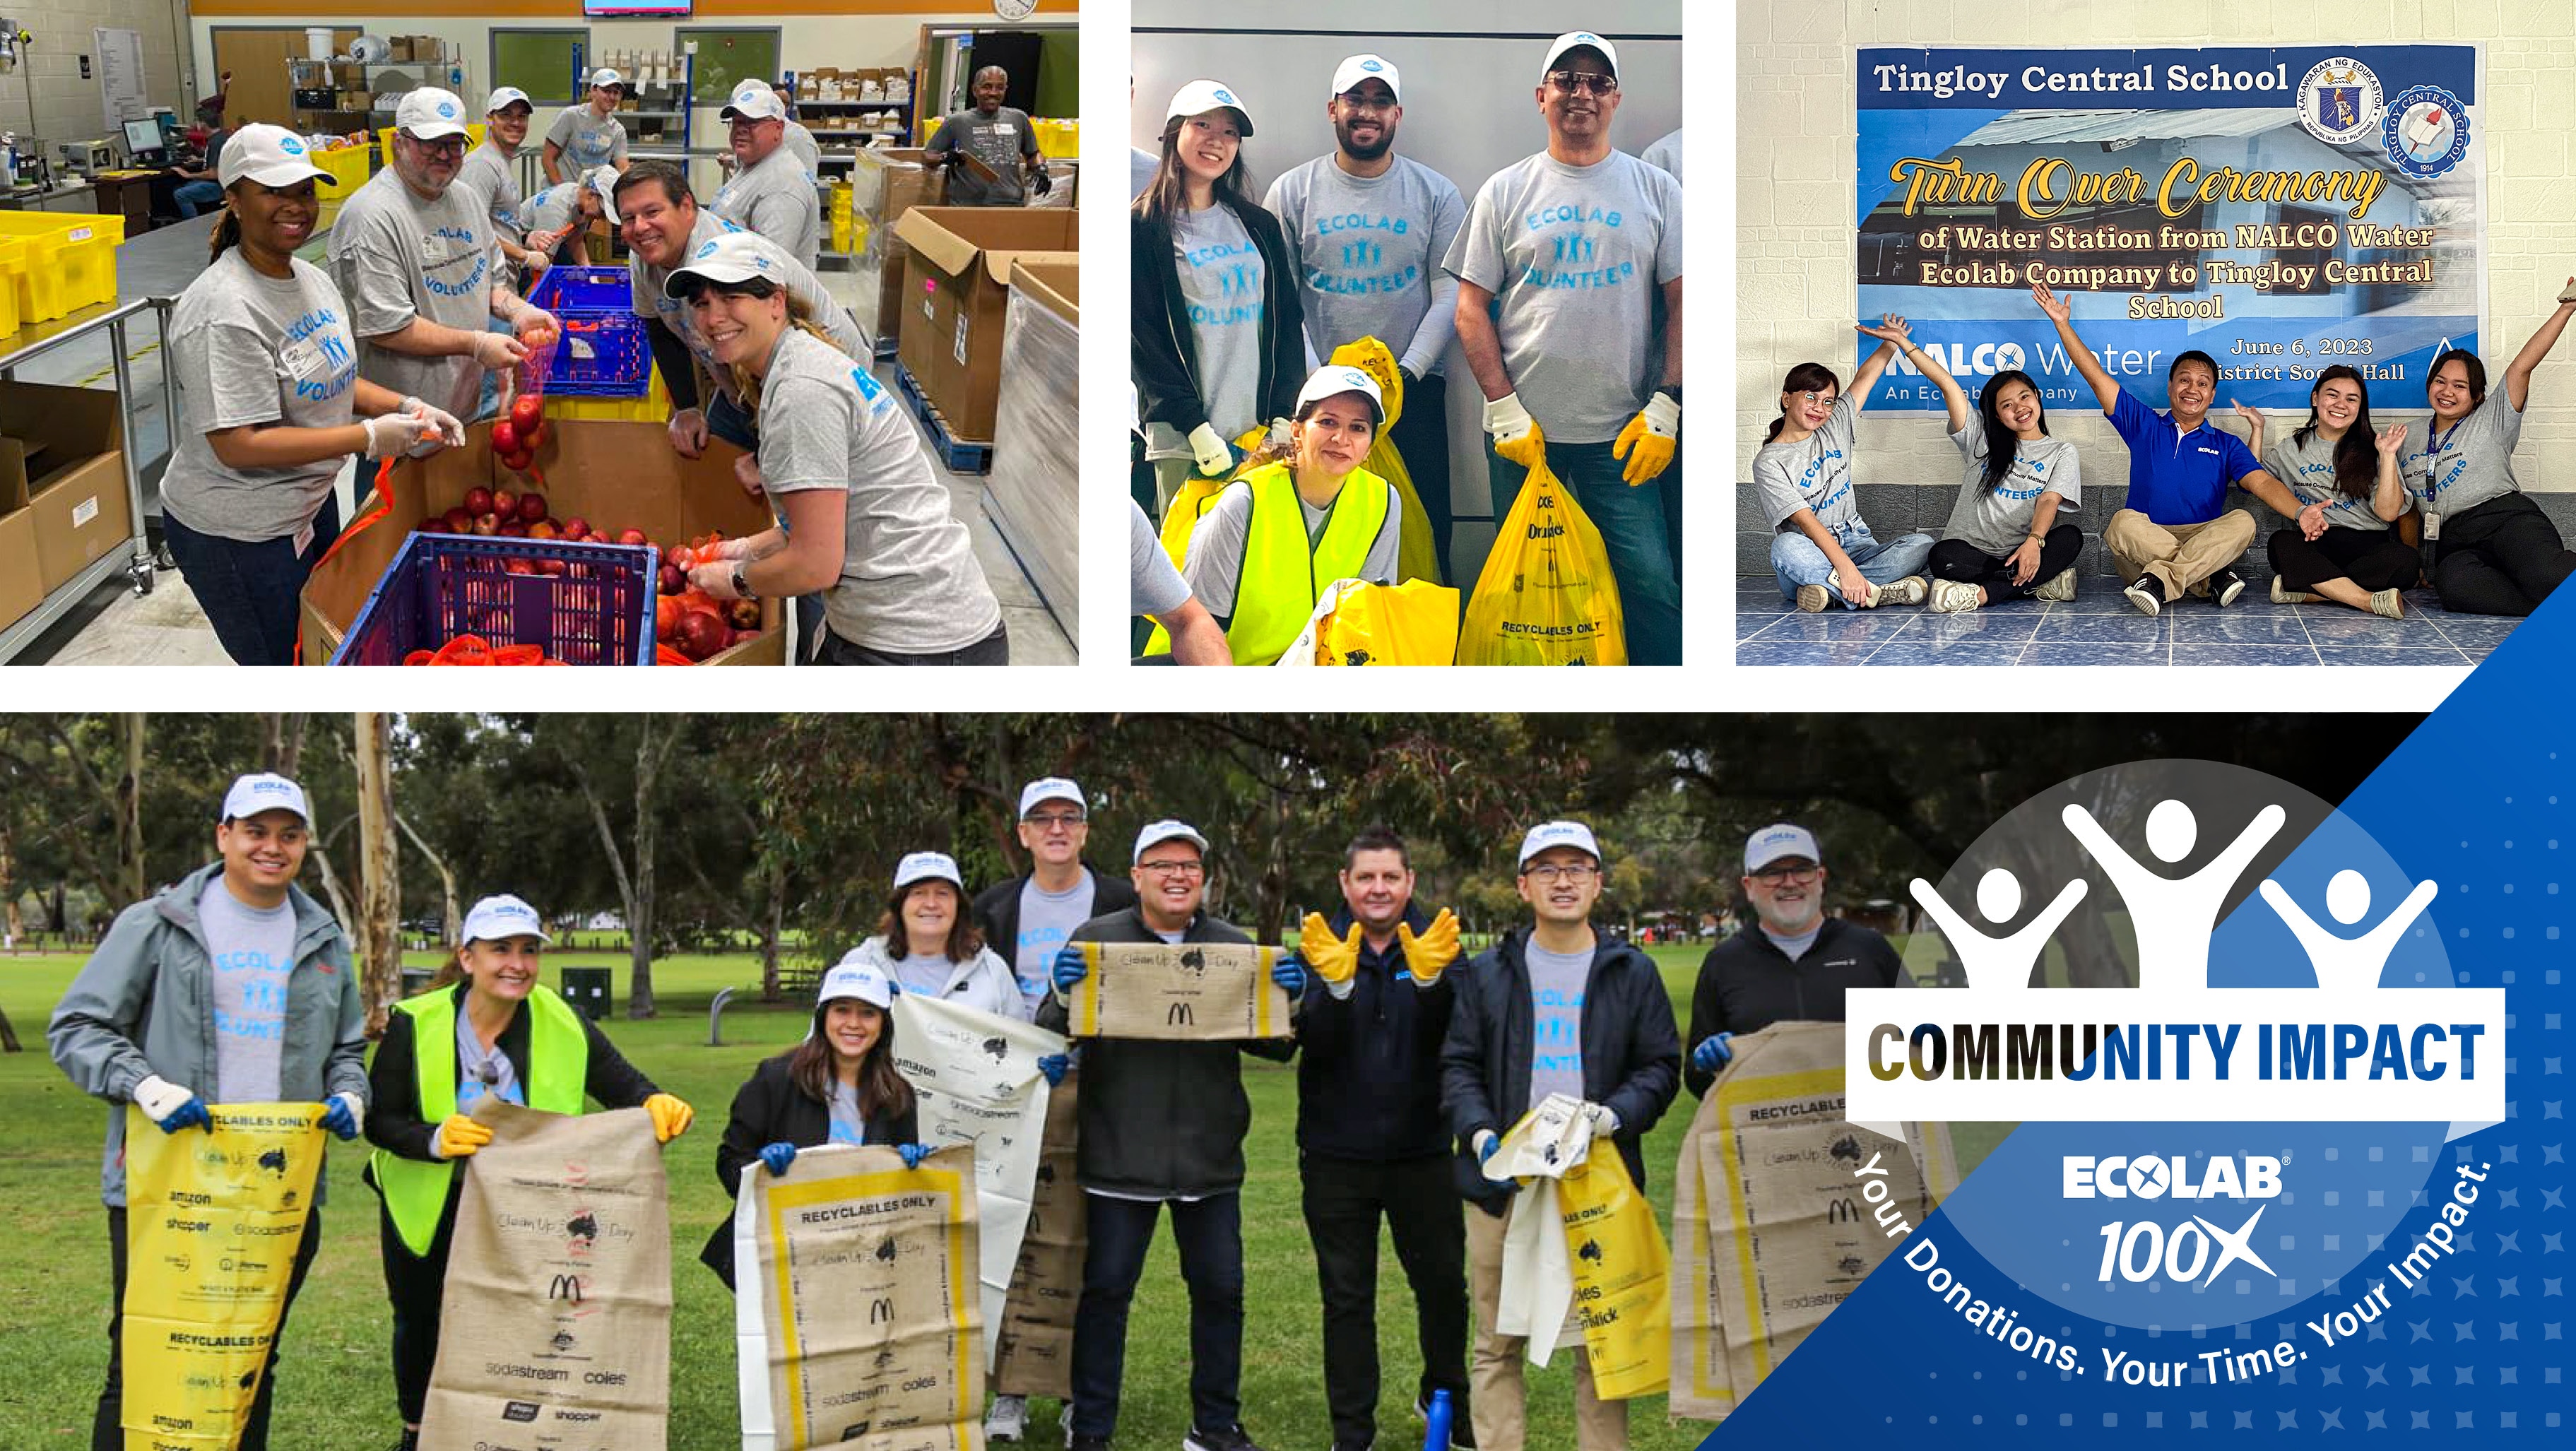 Ecolab associates volunteering during the 100th Anniversary Global Weeks of Service event and Ecolab’s Community Impact logo.